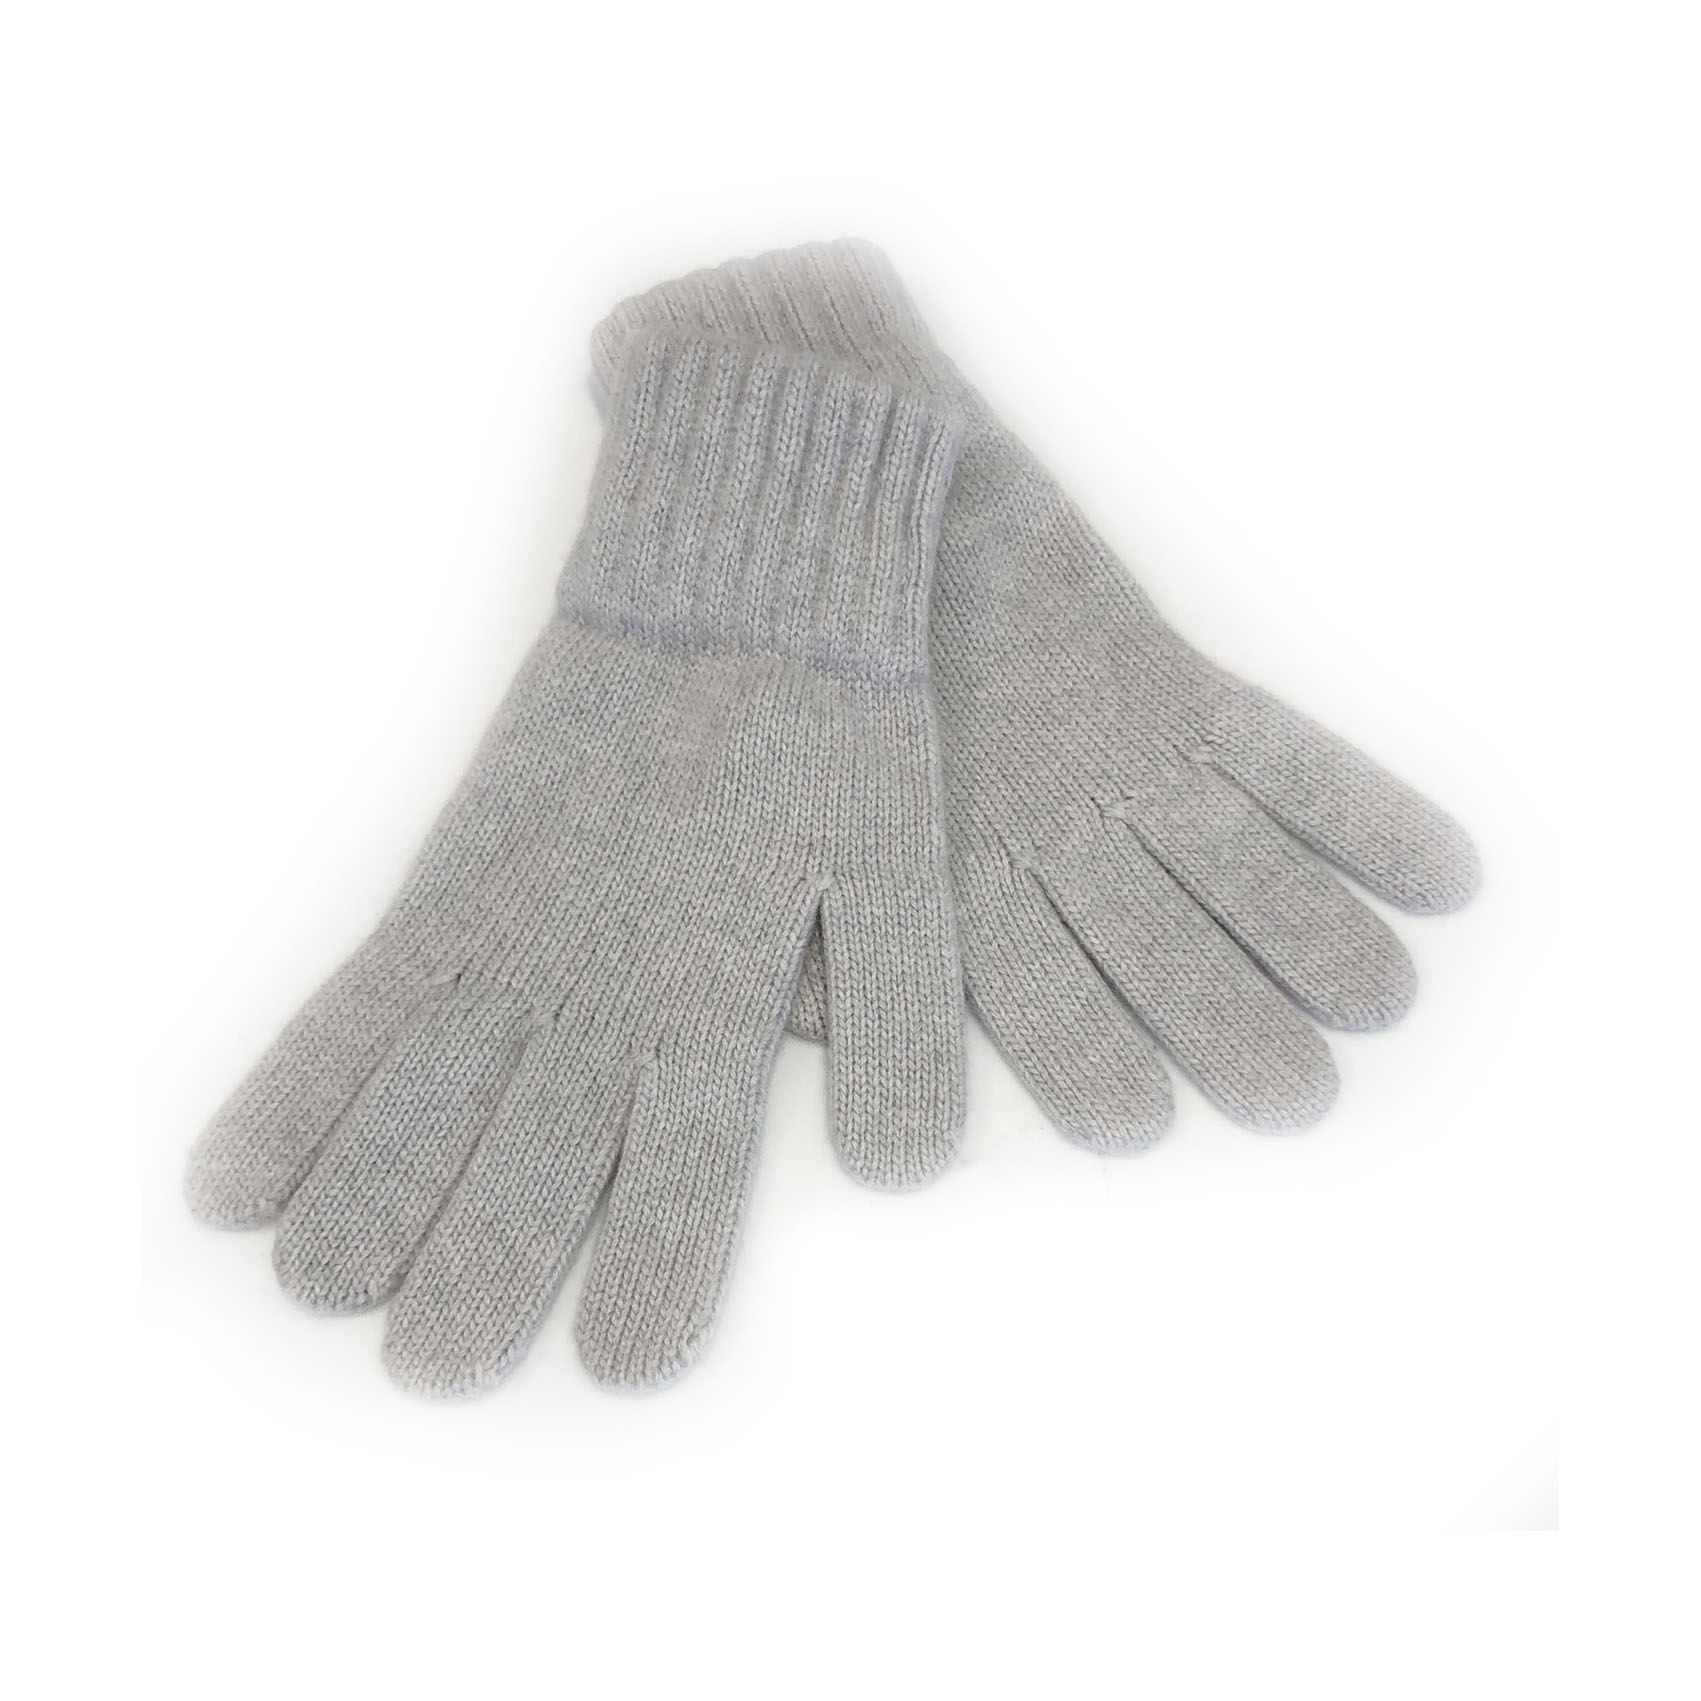 An image of Ladies 100% Cashmere Gloves - Ice Maiden Silver